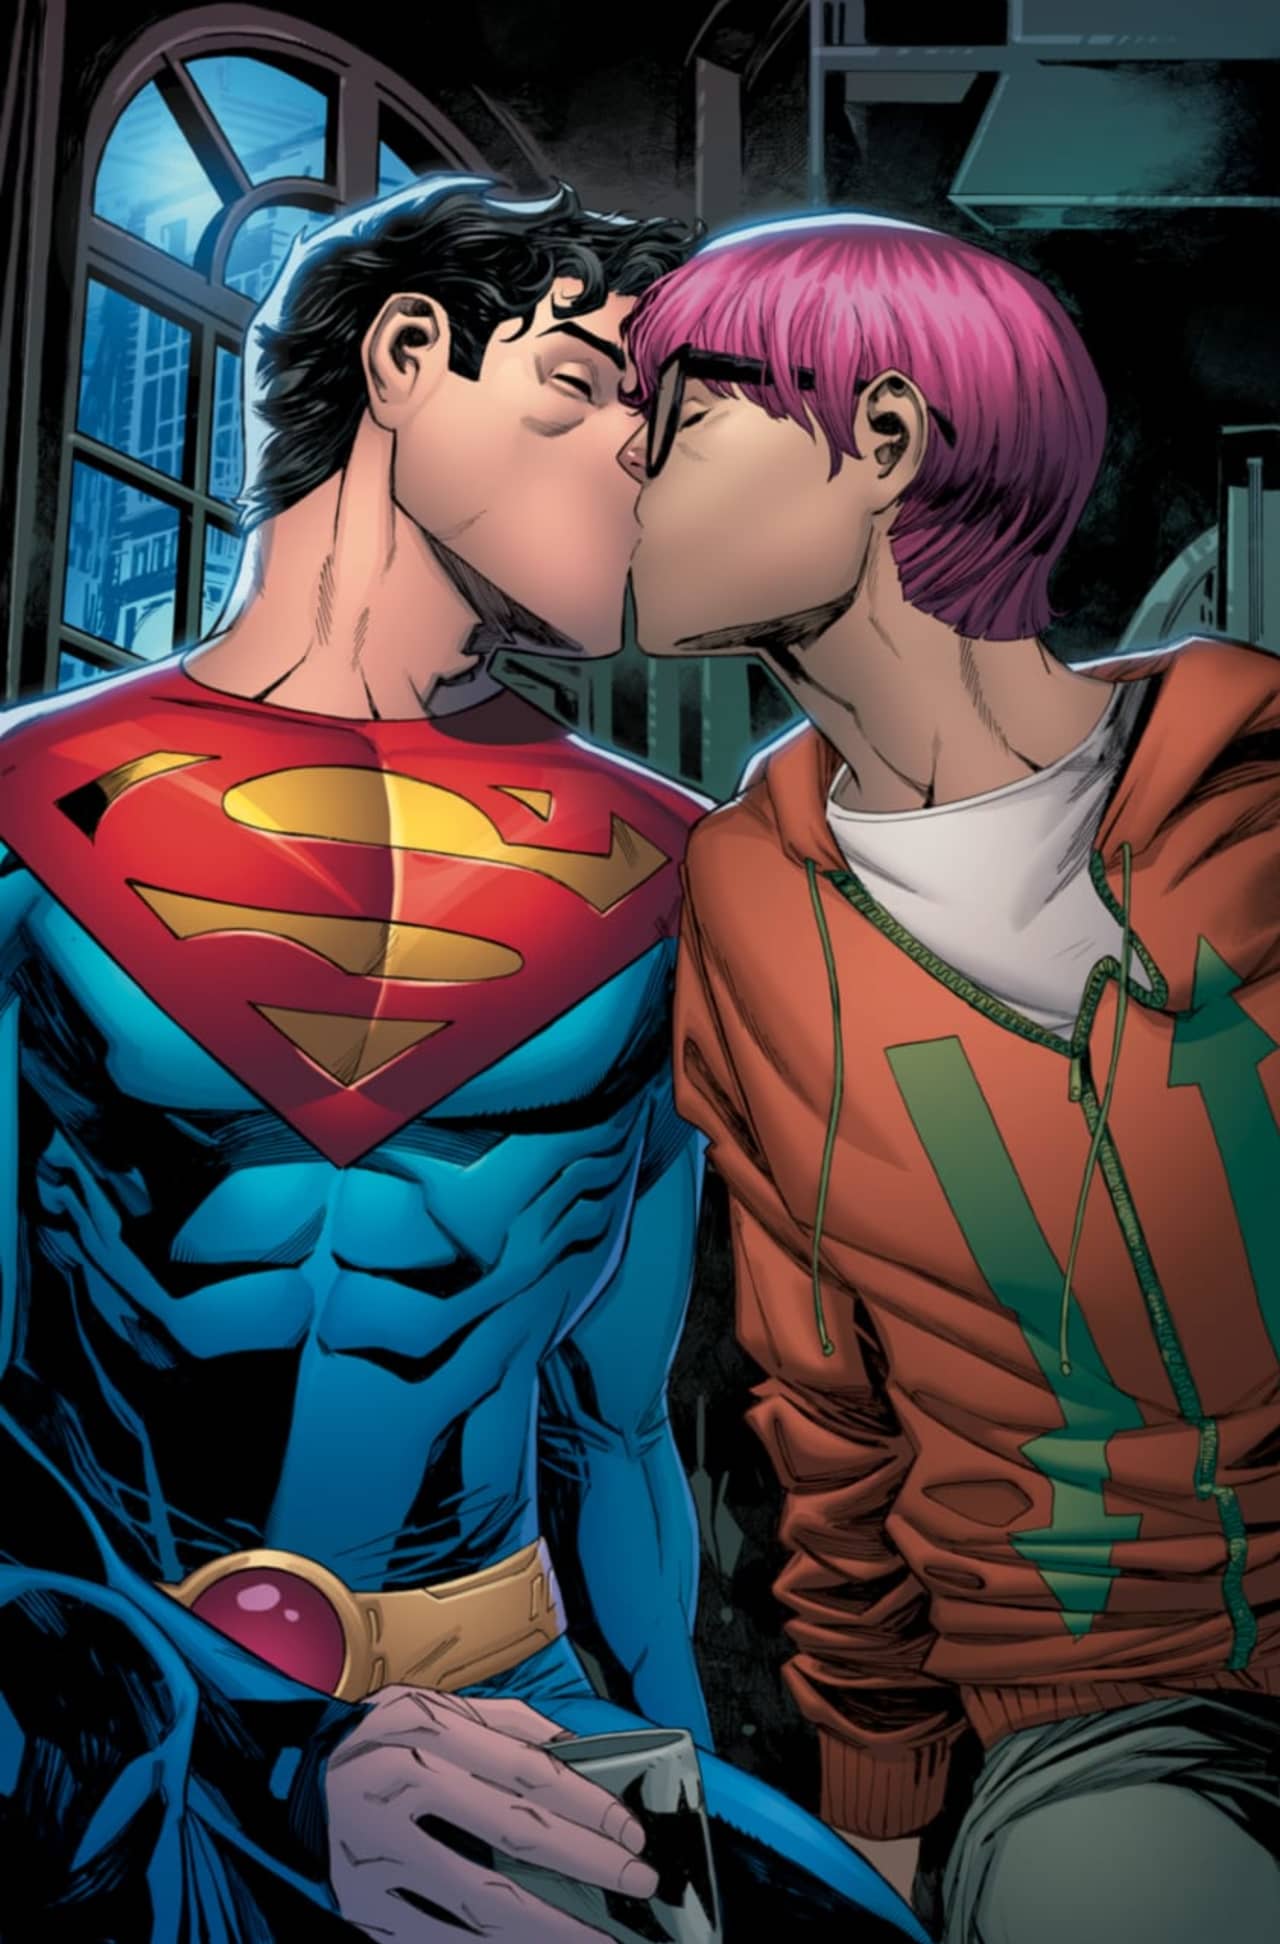 DC Comics has announced that the new Superman comes out as bisexual in a forthcoming issue of the series, which is set to be released next month.